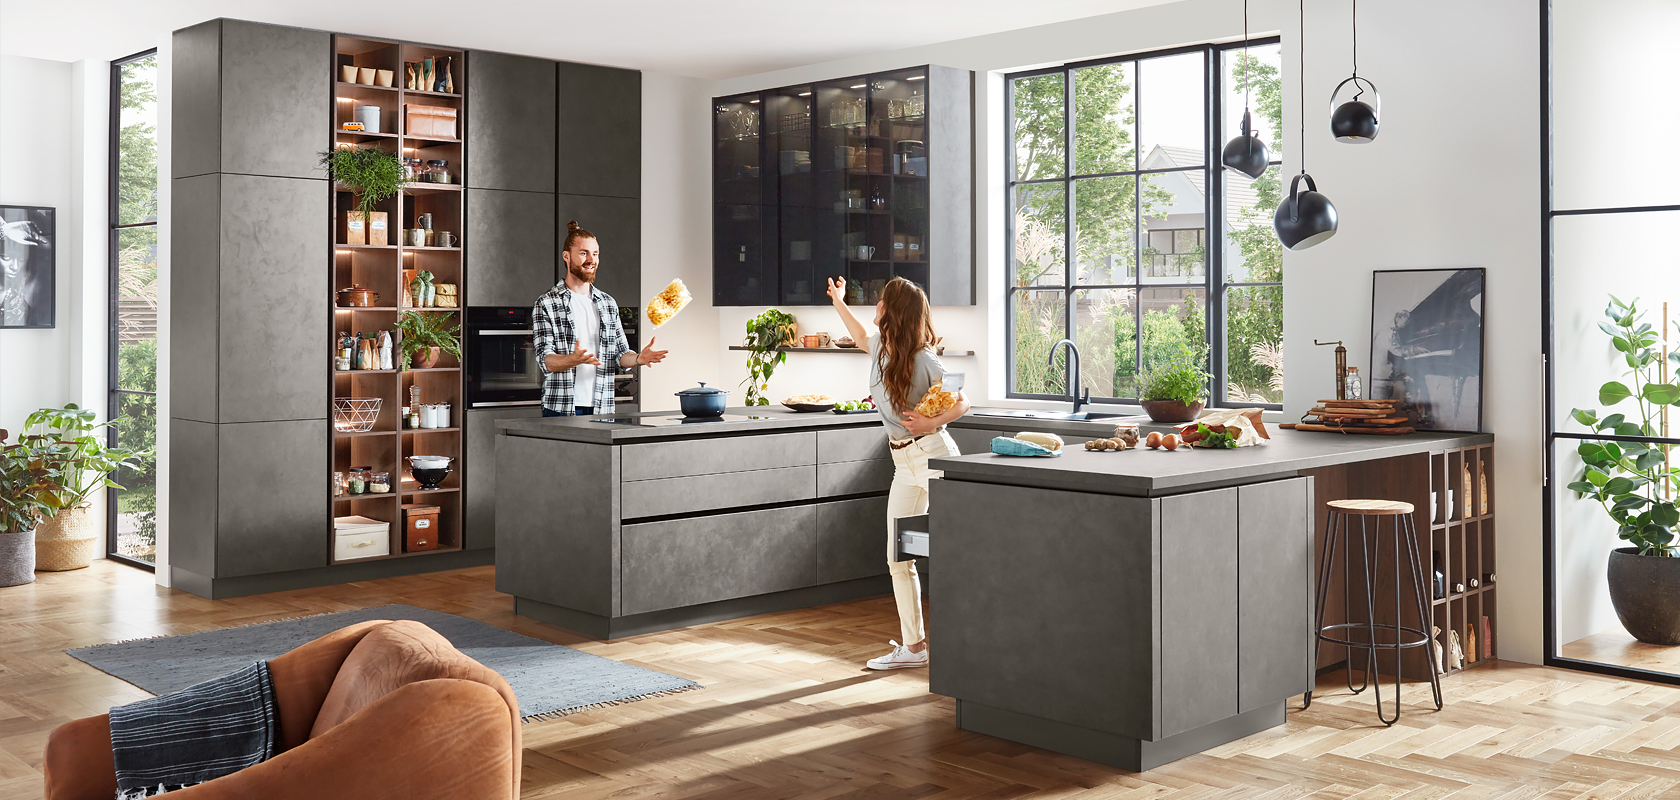 Modern kitchen design with sleek gray cabinetry, integrated appliances, and a central island. A couple enjoys cooking in the well-lit, spacious interior.